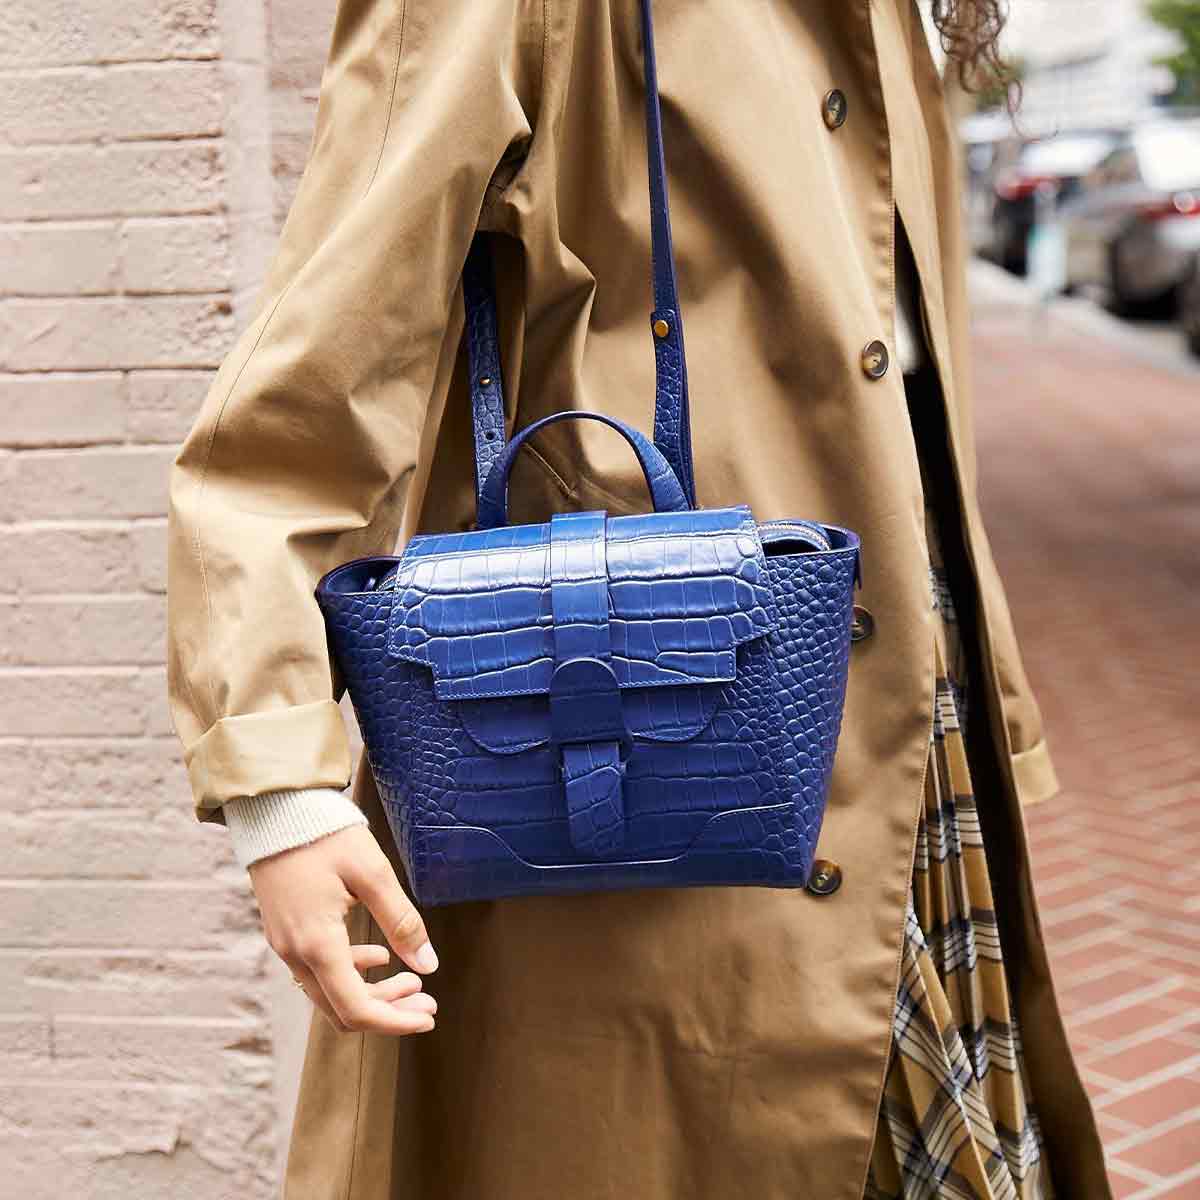 Mini Maestra Bag Marine with Gold Hardware Interior Side, Shown on Shoulder of Woman with Pale Skin weaning a Tan Burberry Trench Coat